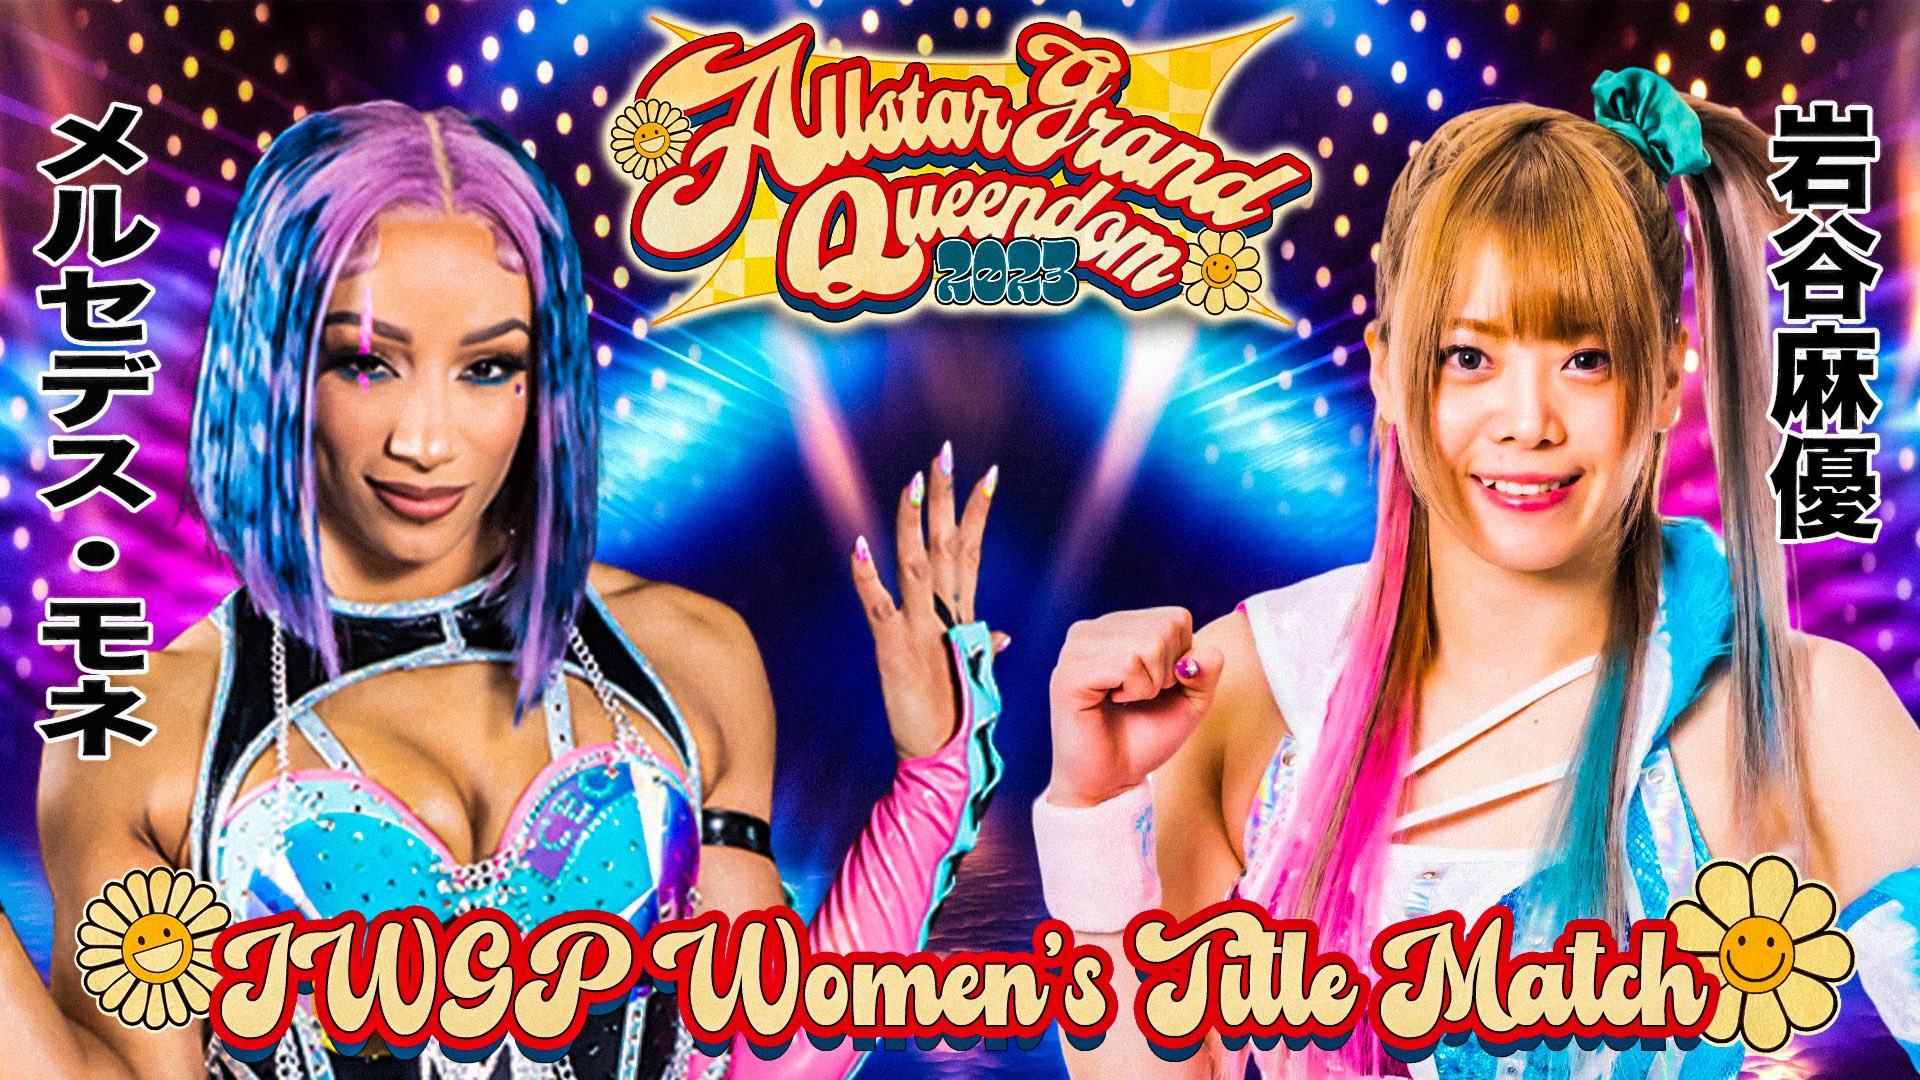 The dream match between Mercedes Moné and Mayu Iwatani